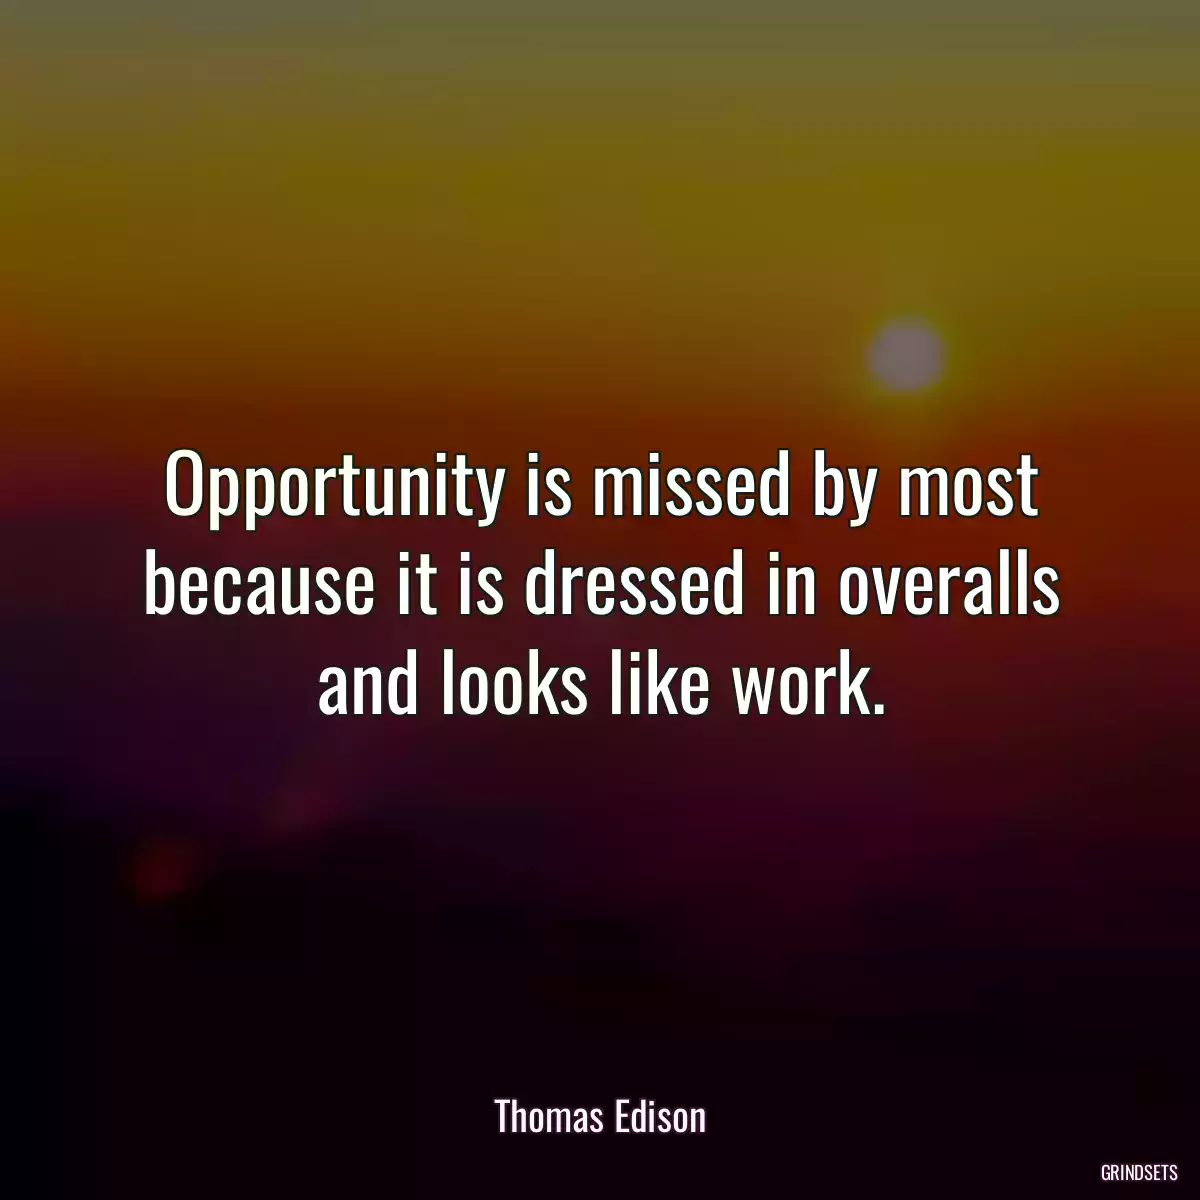 Opportunity is missed by most because it is dressed in overalls and looks like work.